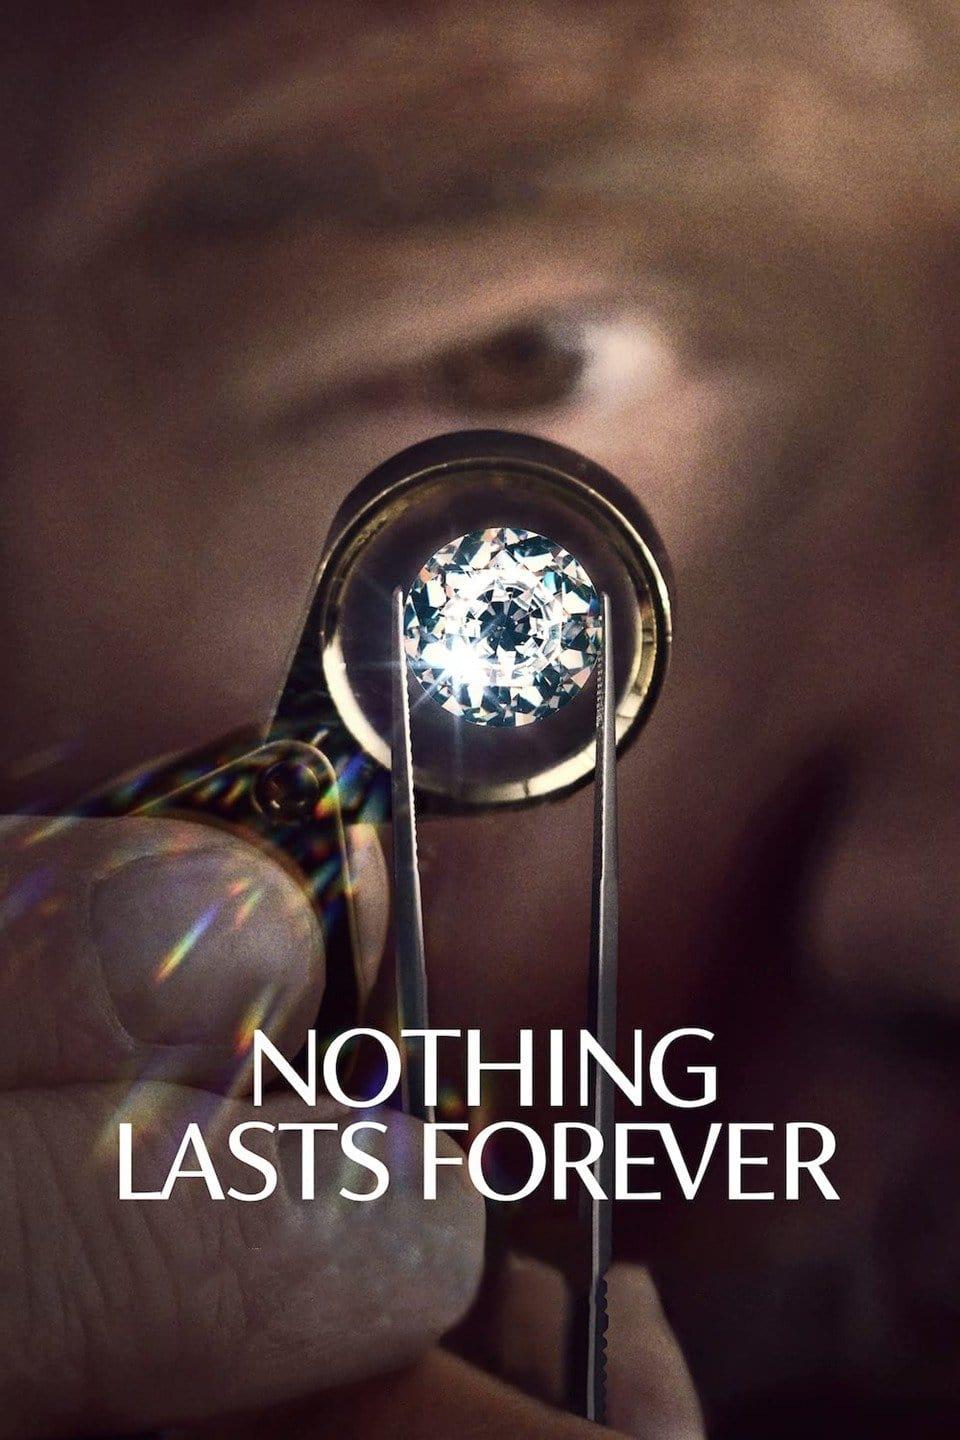 Nothing Lasts Forever poster